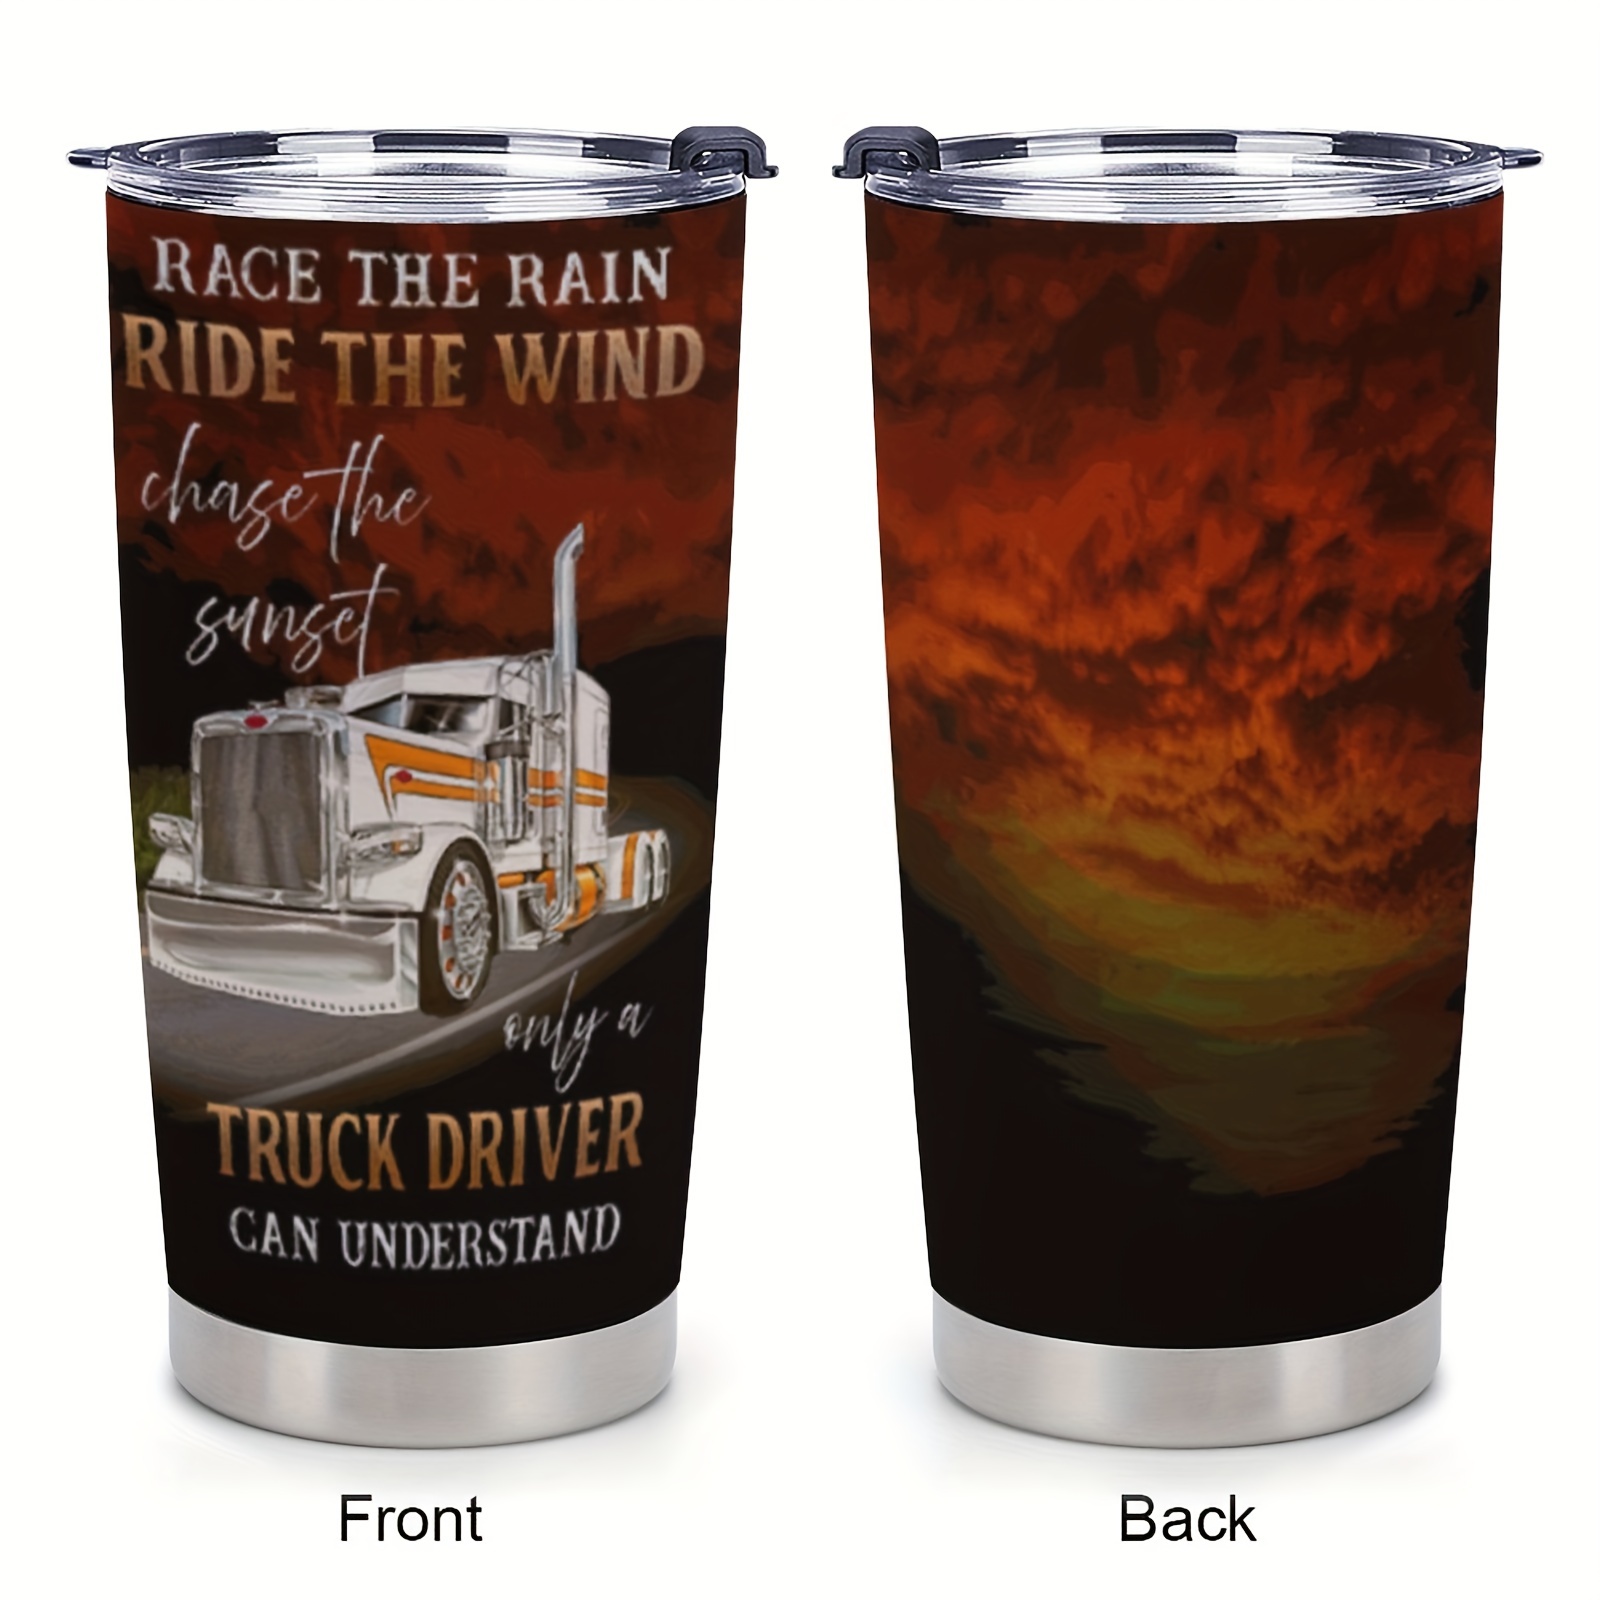 Gifts For Truckers - A Guide to Cool Things Truckers Actually Want